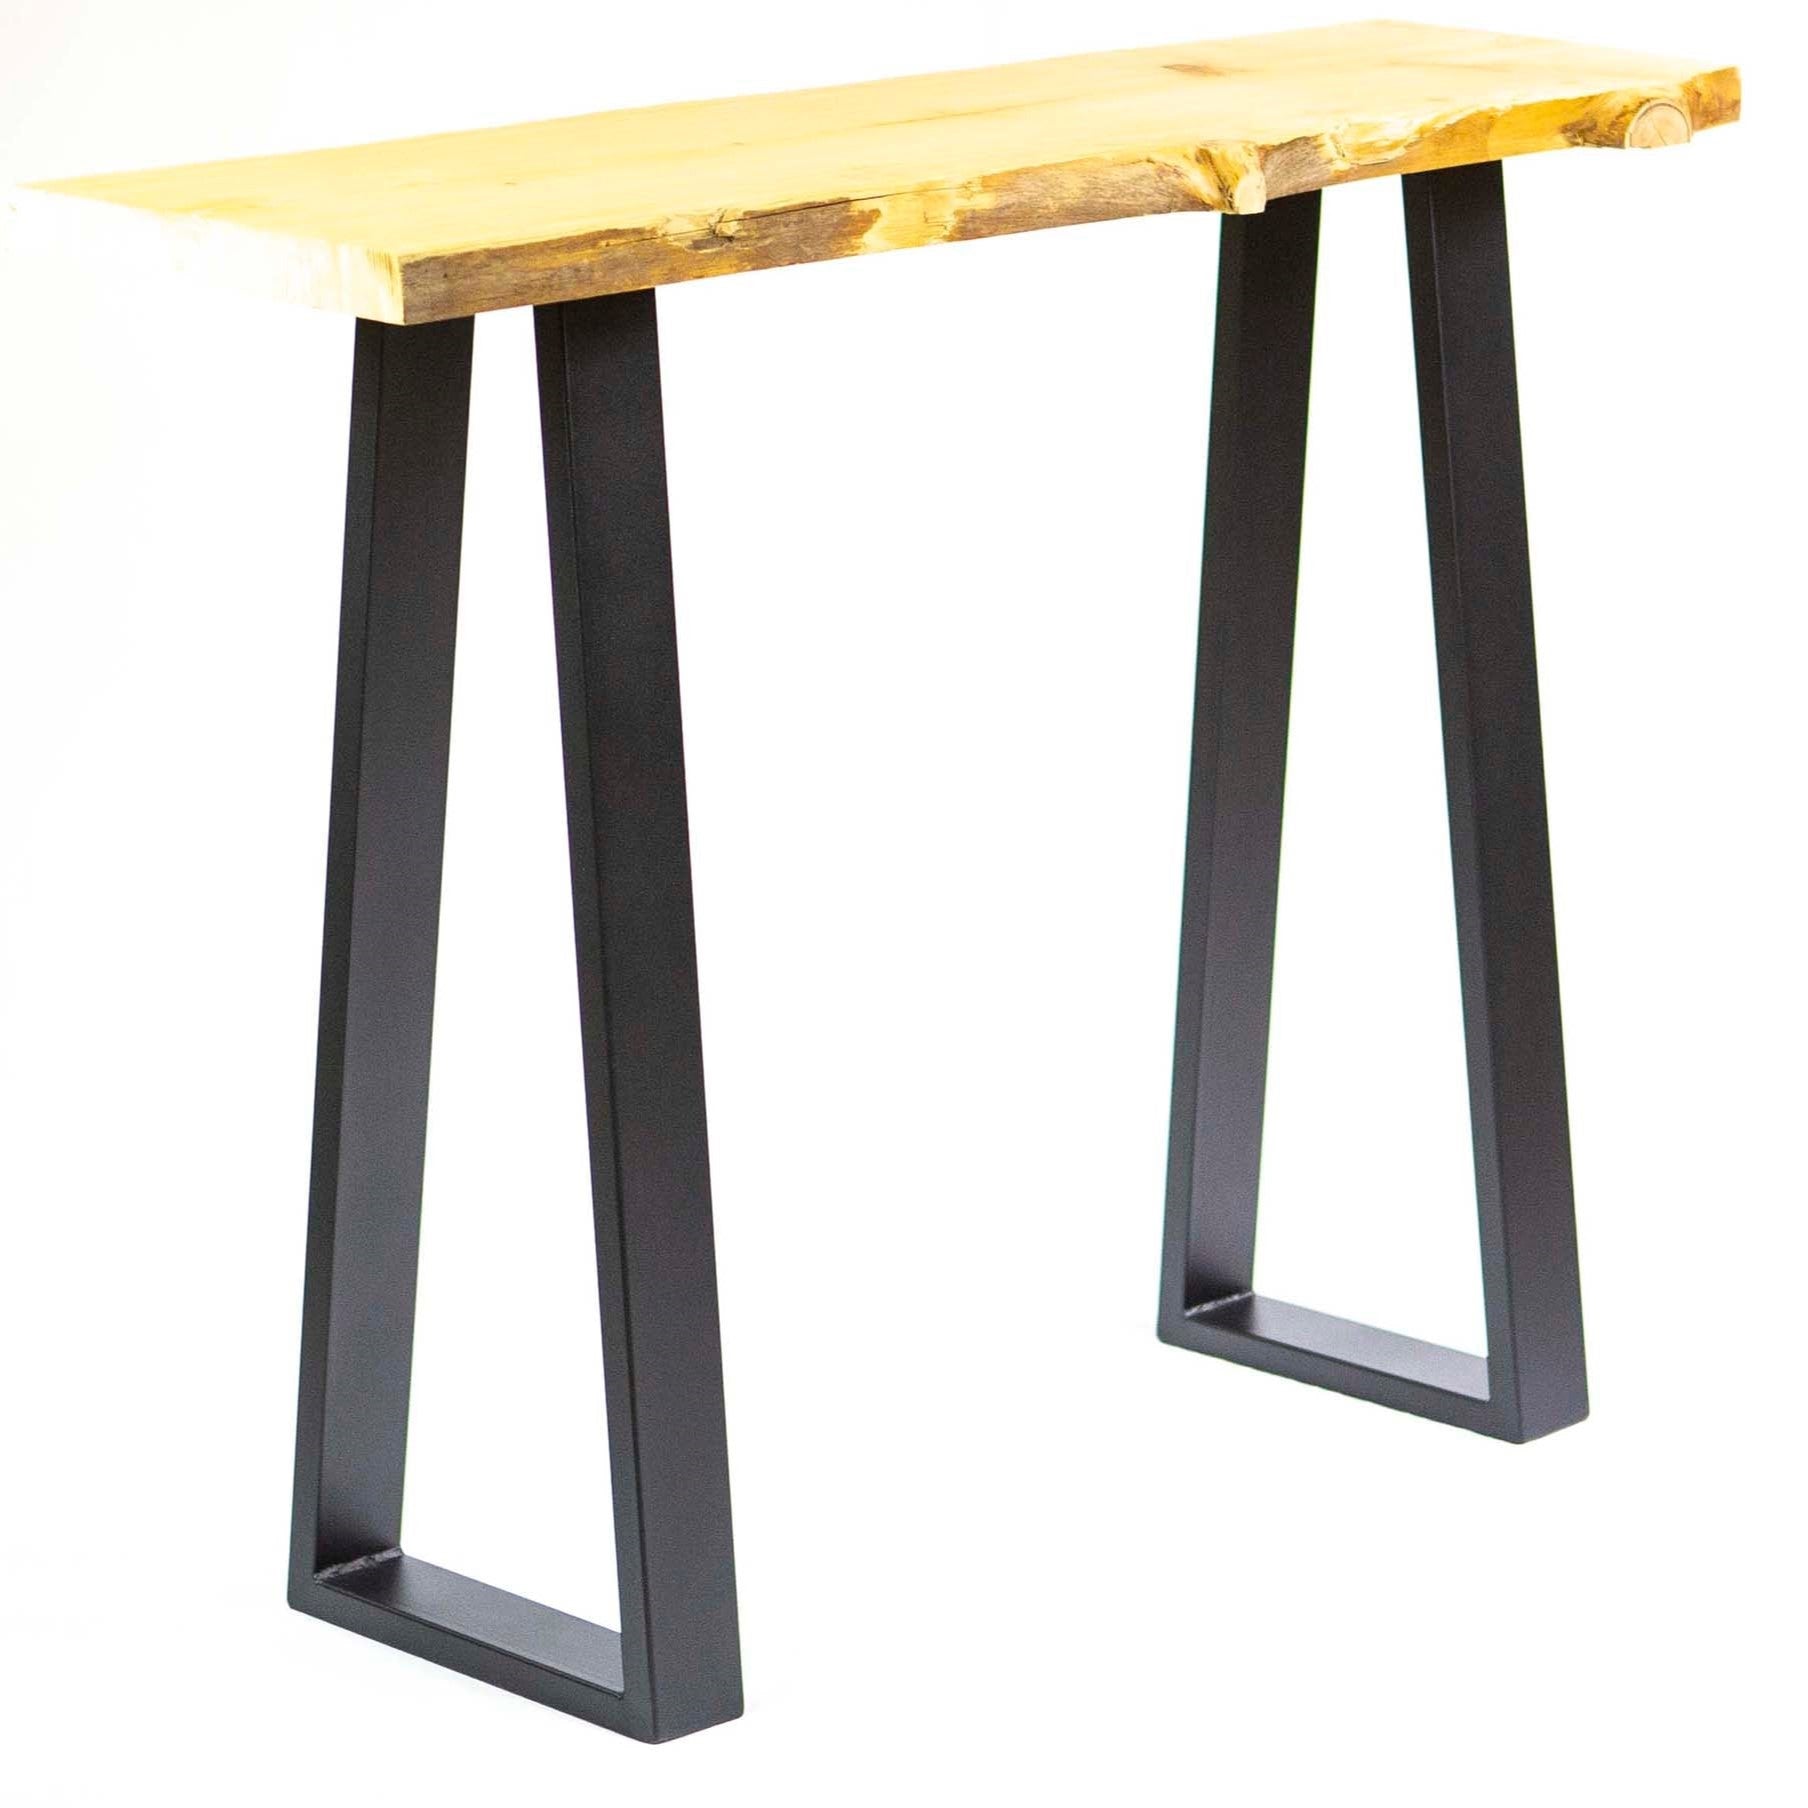 SS270 Trapezoid Counter Height Table Legs, 86cm High, Black Powder Coated, 1 Pair